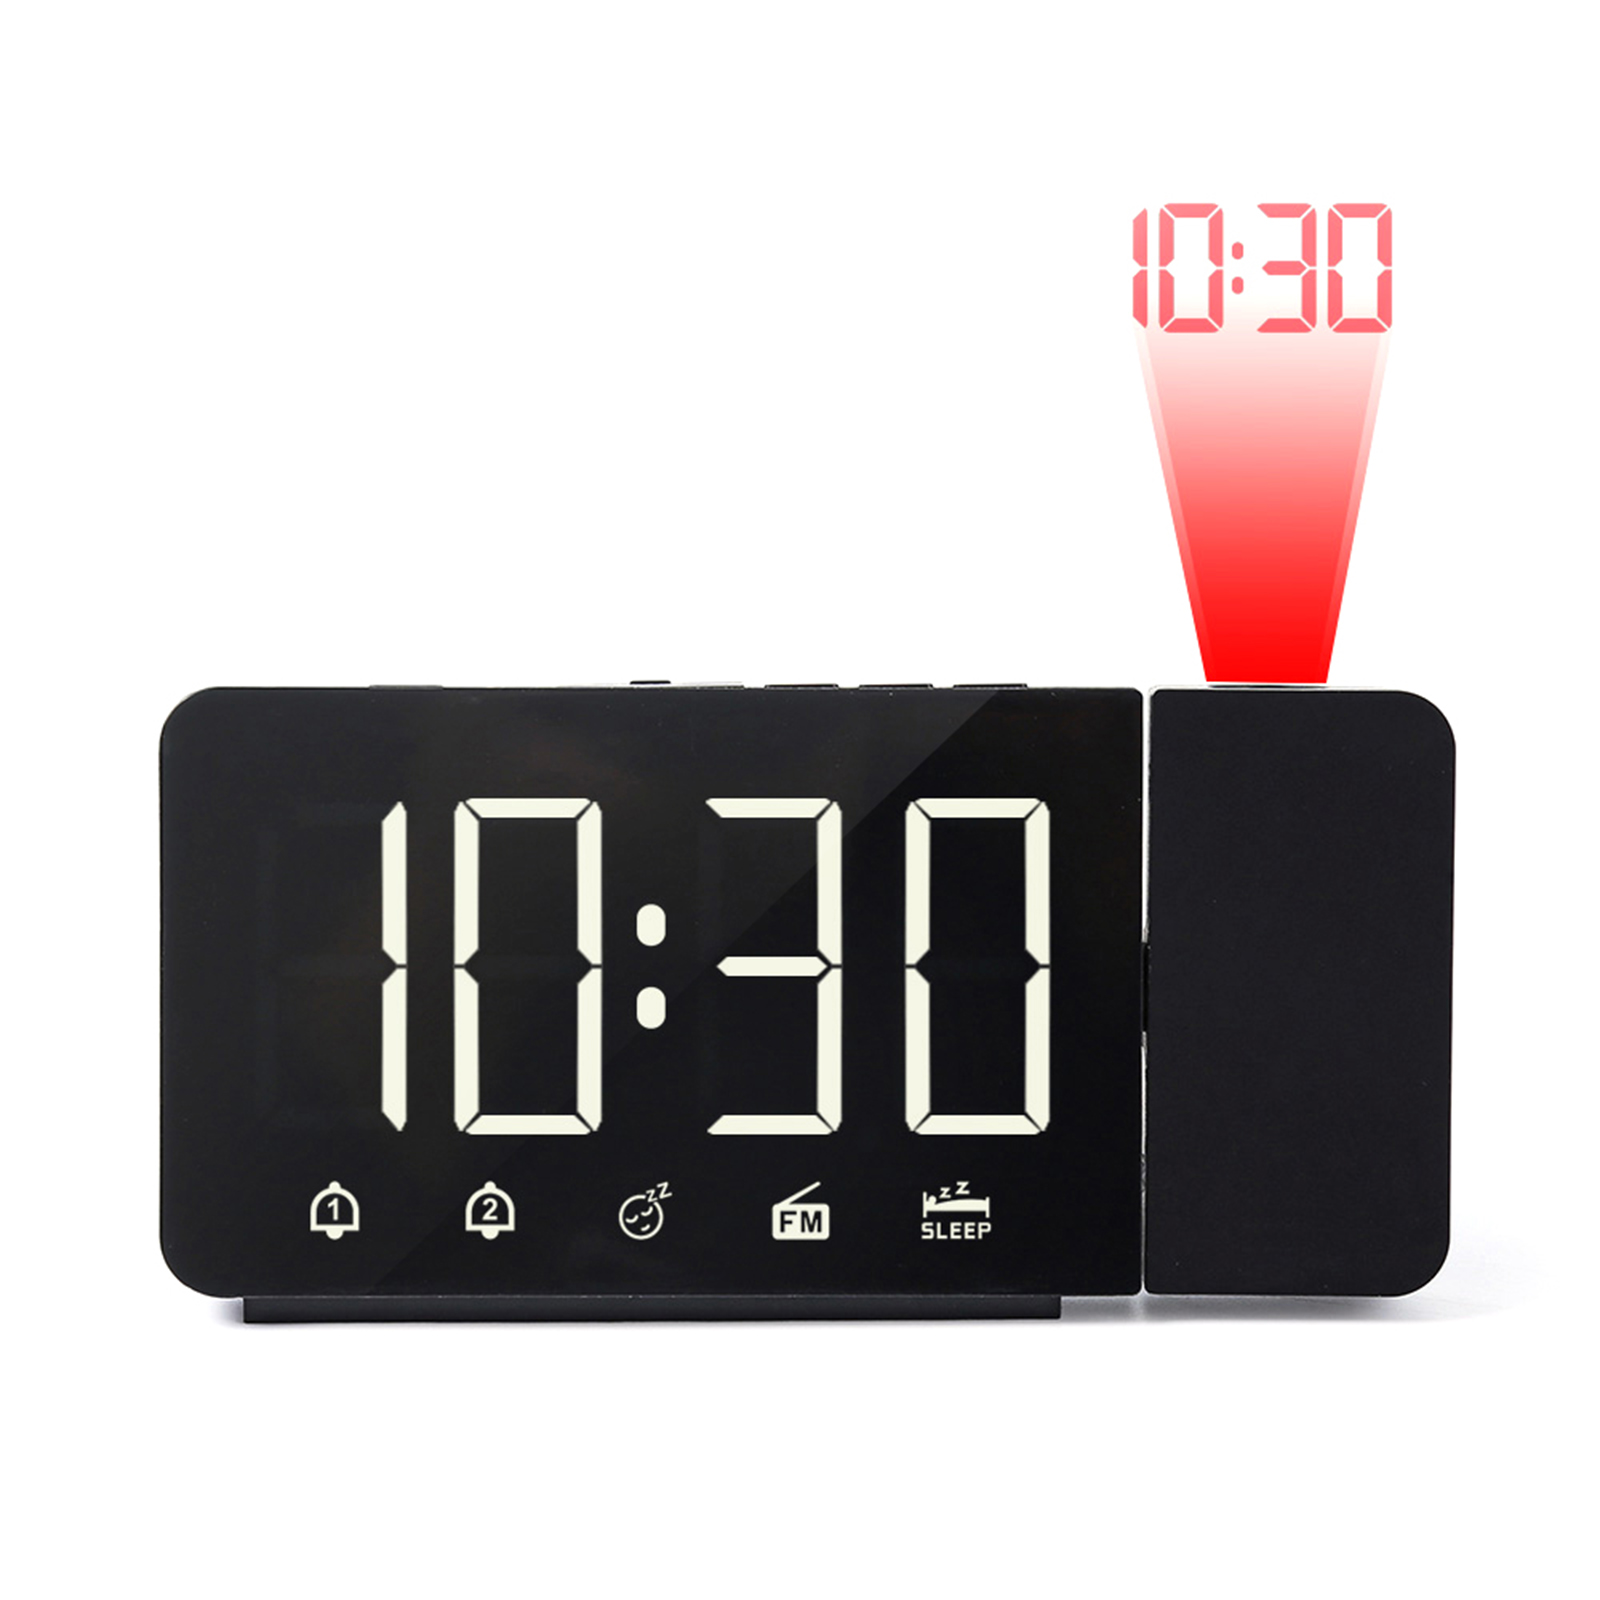 LED Digital Alarm Clock Watch Electronic Table Clocks USB Charging with FM Radio Time Projector Snooze Function 4 Digital Alarm